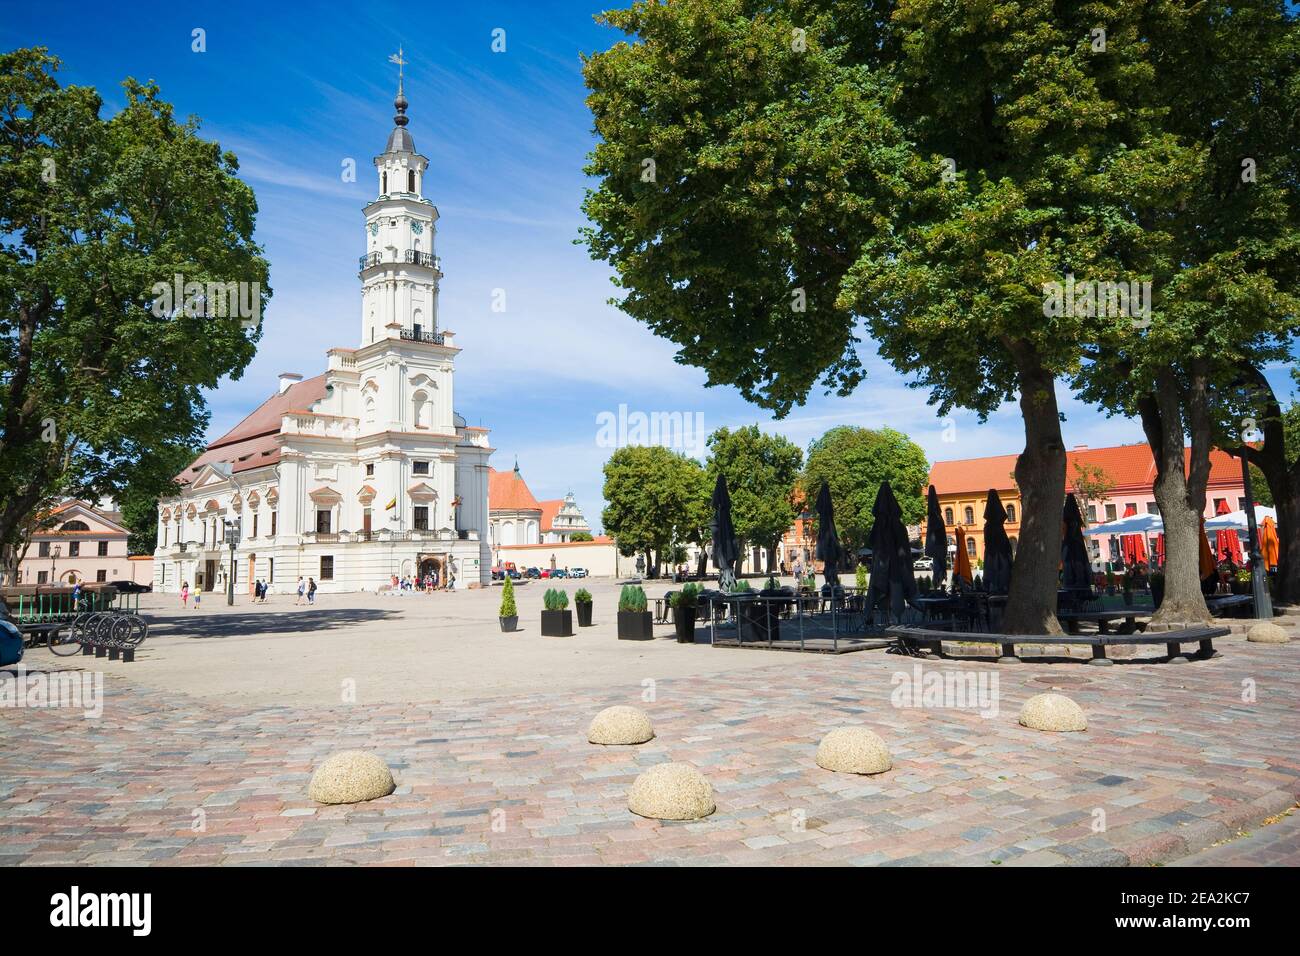 Historical building of Town Hall of Kaunas called 'The white swan', Lithuania Stock Photo